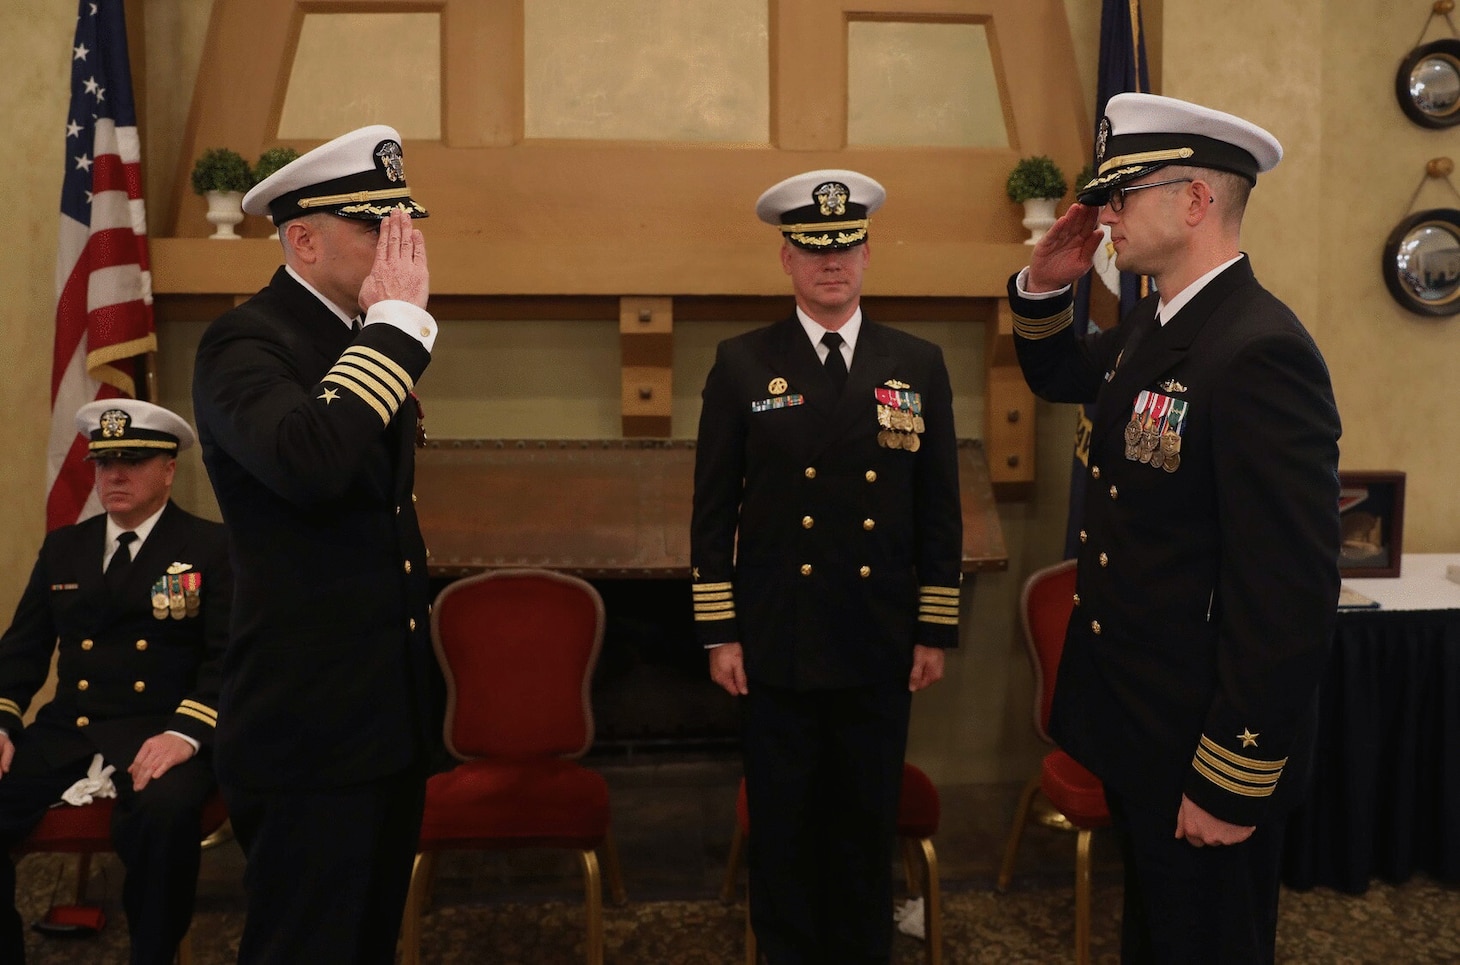 Capt. Bennett Christman, left, is relieved by Cmdr. Carl Jappert, right, during a change of command ceremony for the Virginia-class fast-attack submarine USS New Hampshire (SSN 778) onboard Naval Support Activity Hampton Roads, Jan. 20.